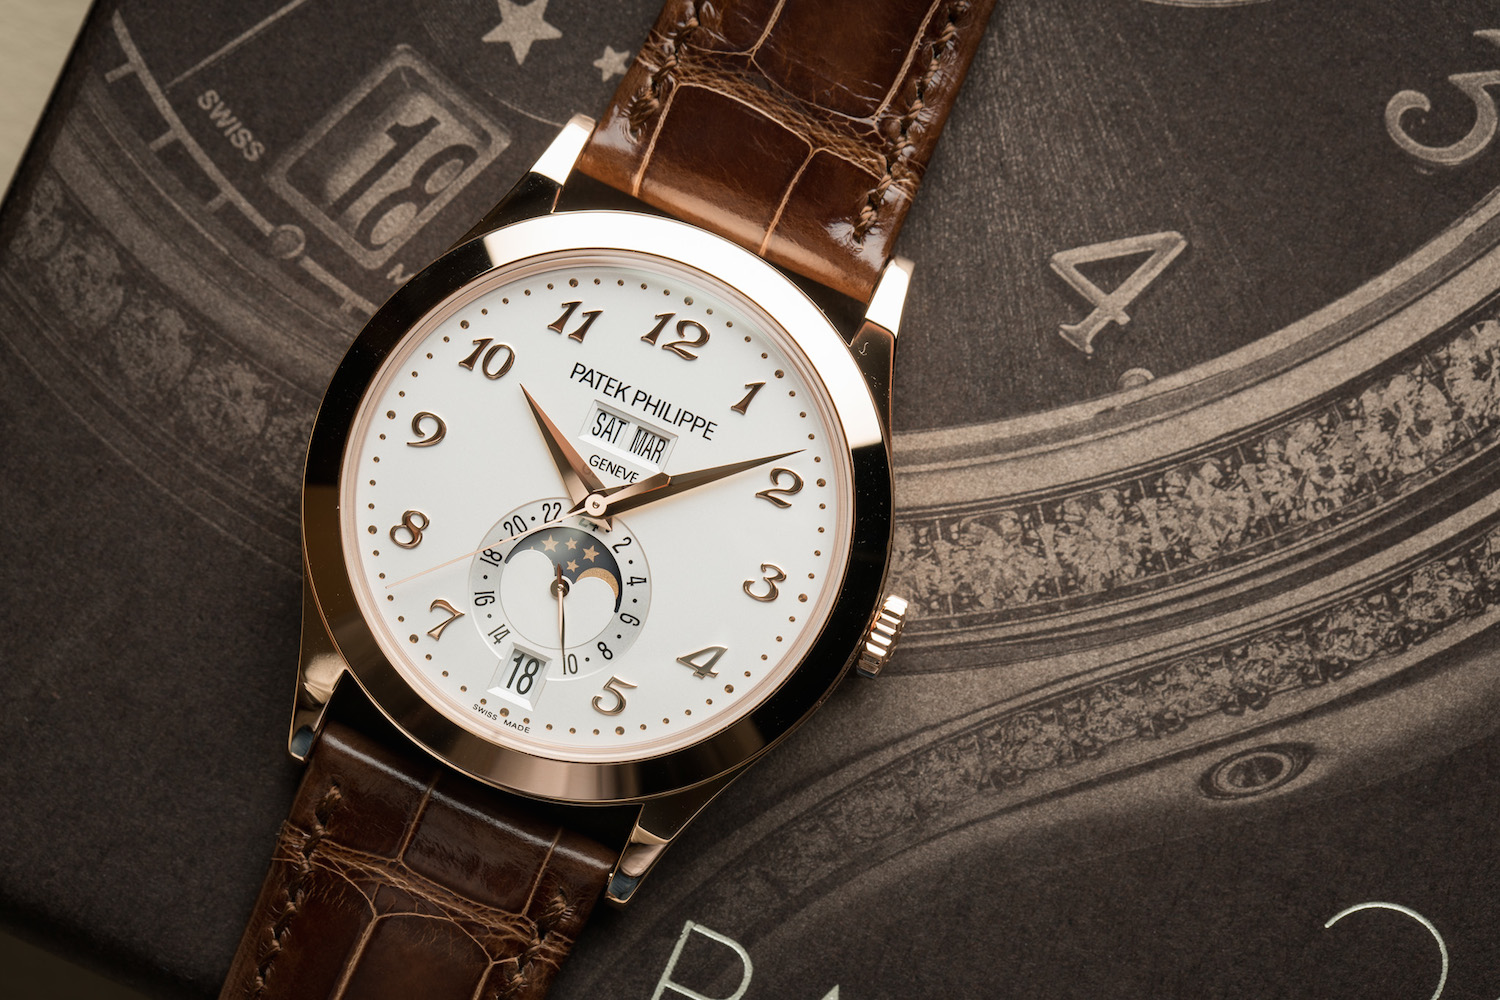 Three Annual Calendars From Patek Philippe, Blancpain, and Montblanc